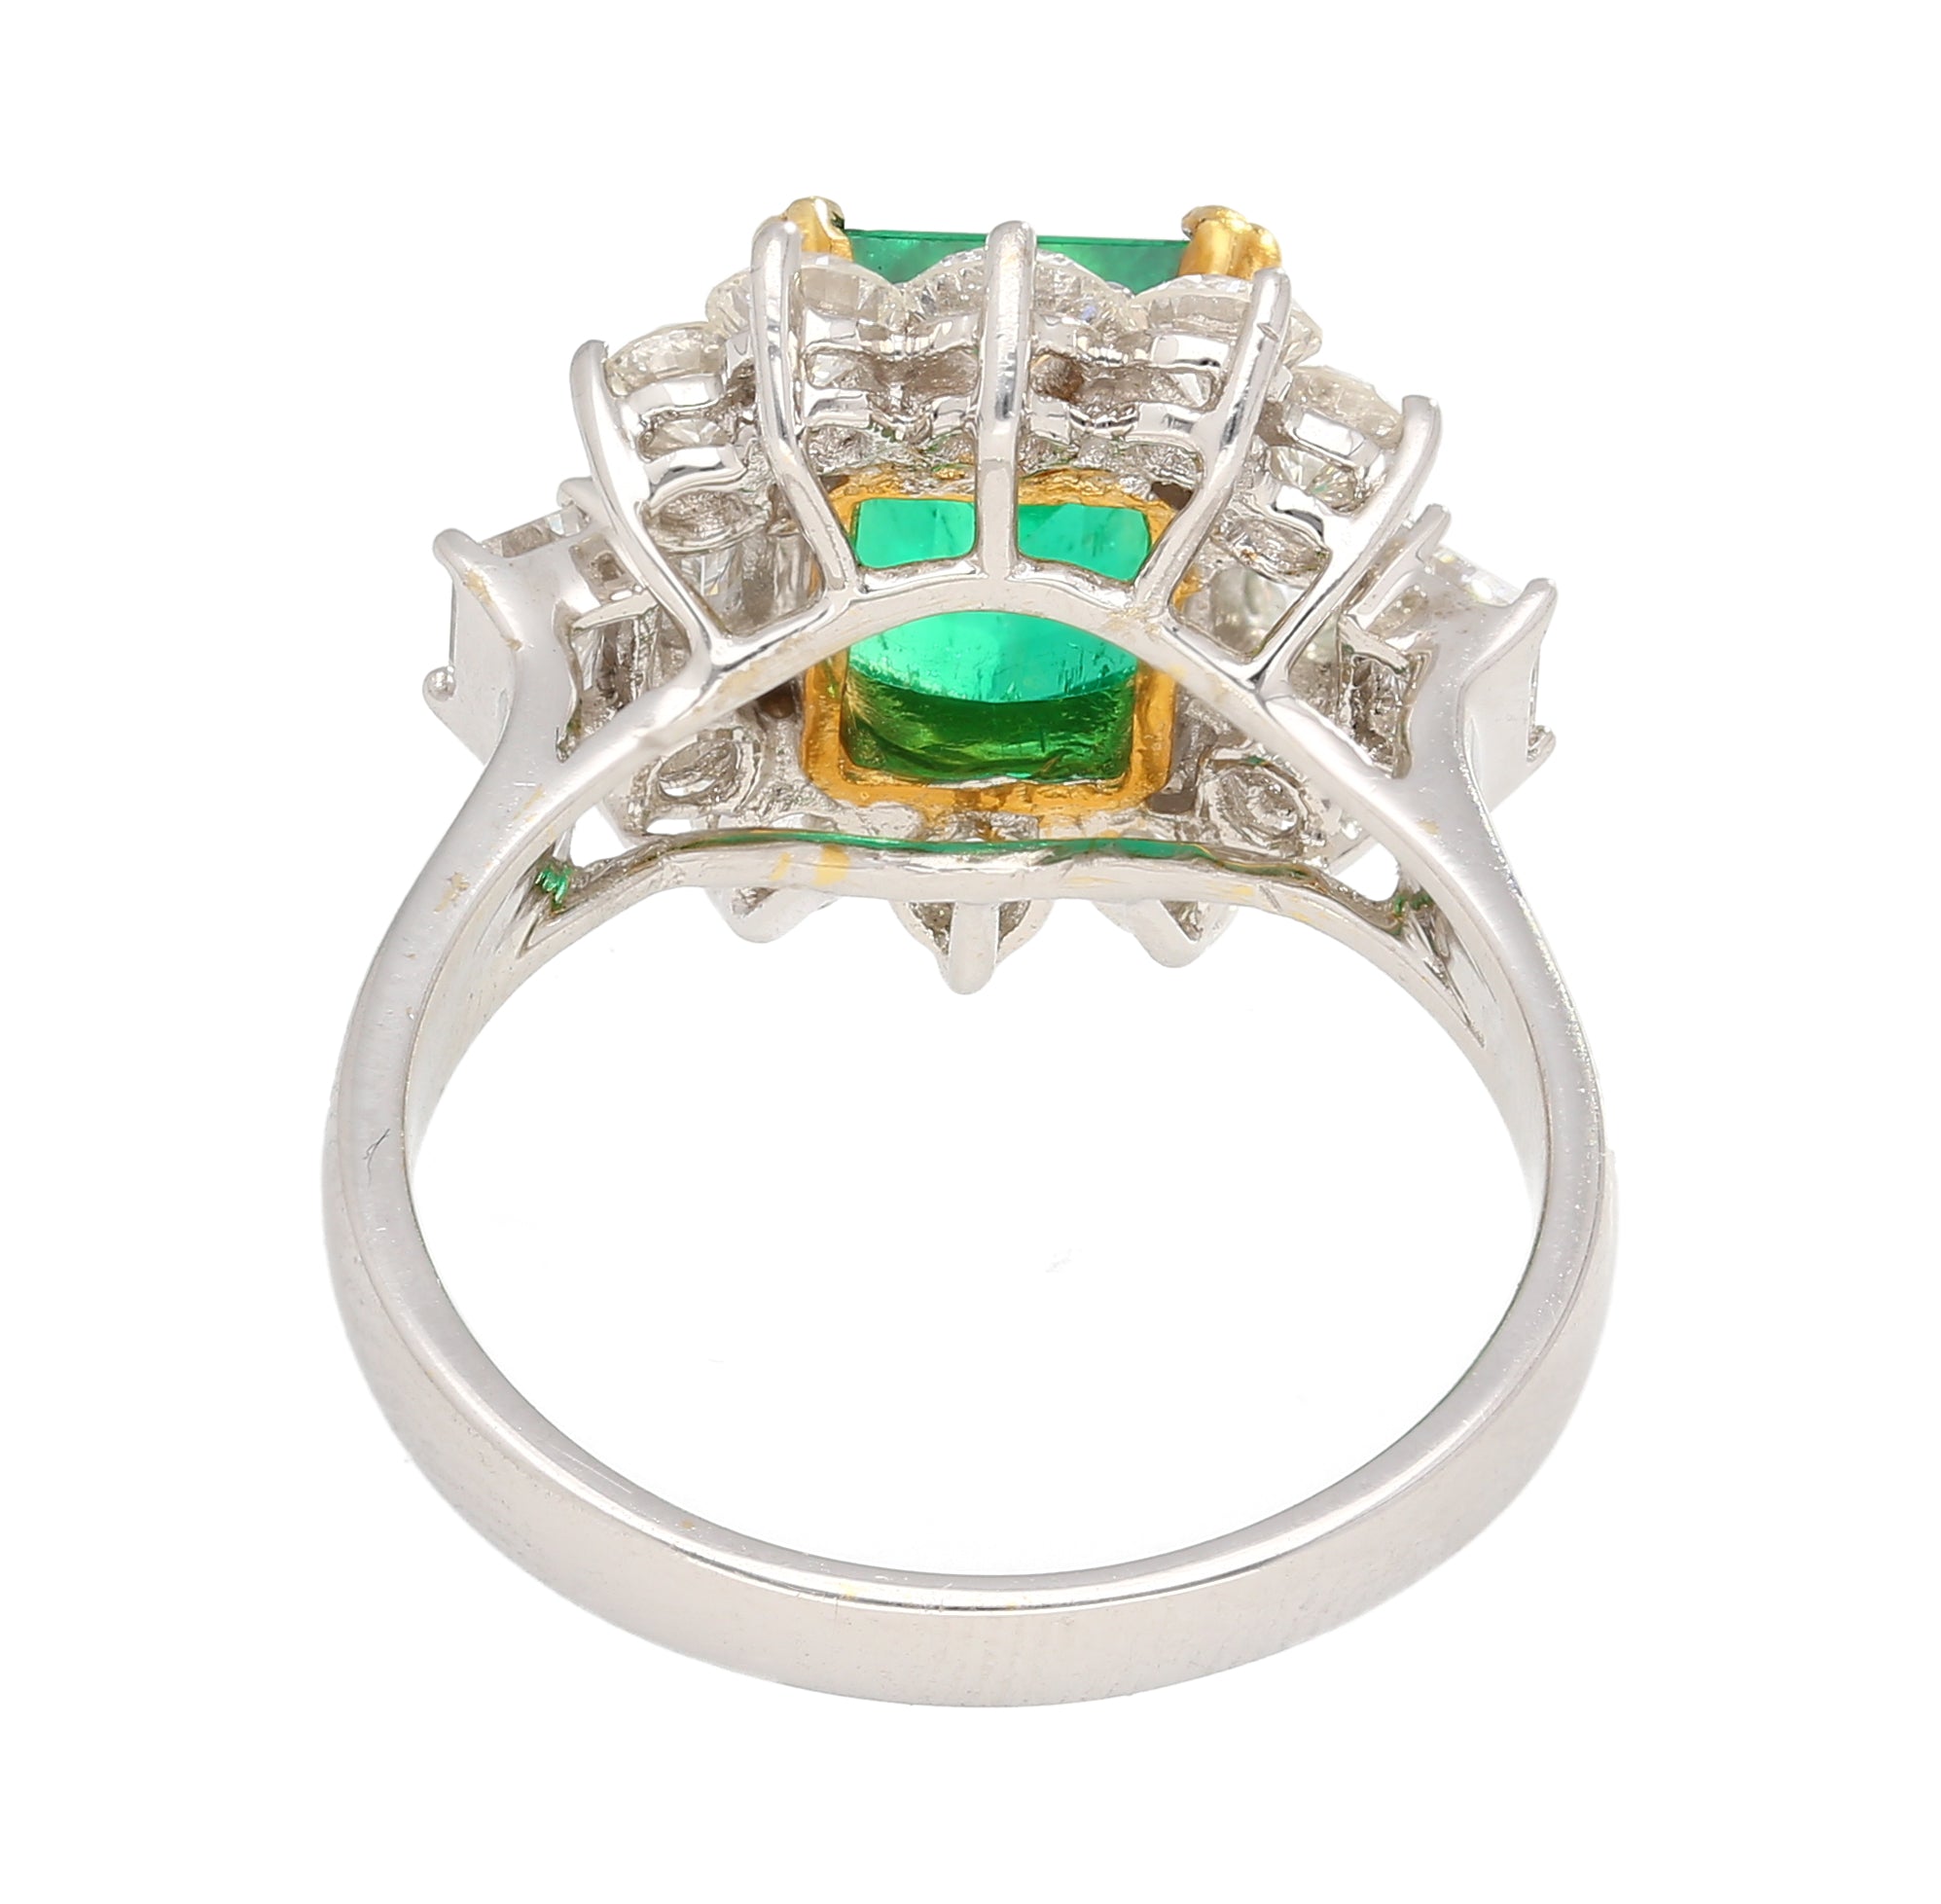 4_42-Carat-TW-Colombian-Emerald-with-Round-Emerald-Cut-Diamonds-Sides-in-18K-White-Gold-Rings-2.jpg